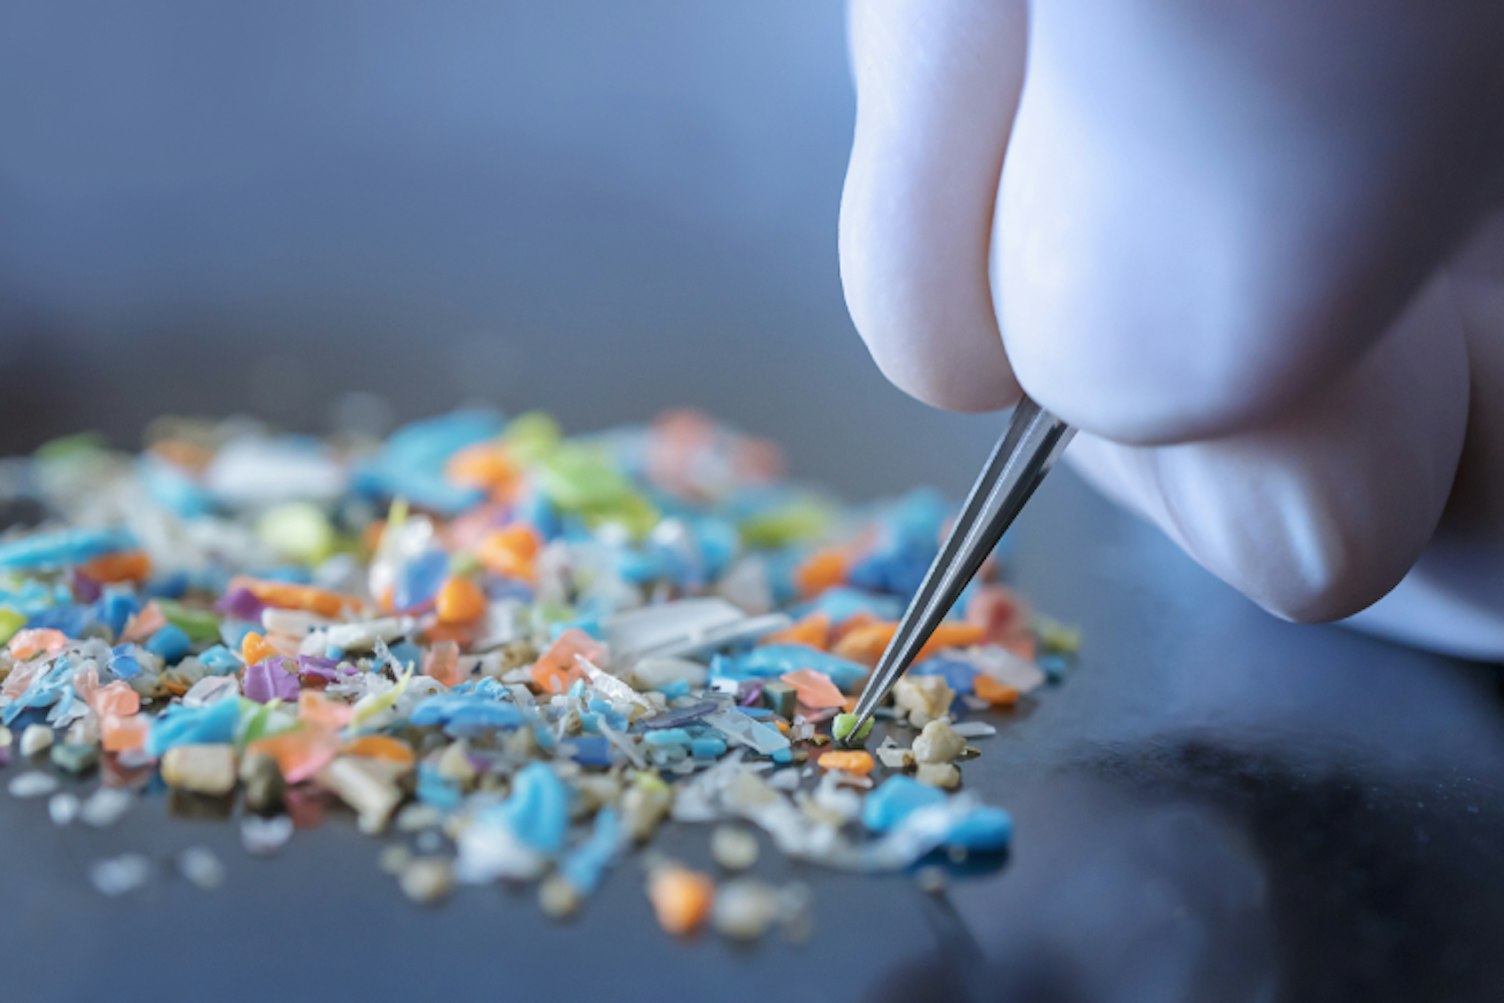 Macro shot of a person with medical gloves and tweezers inspecting a pile of micro plastics